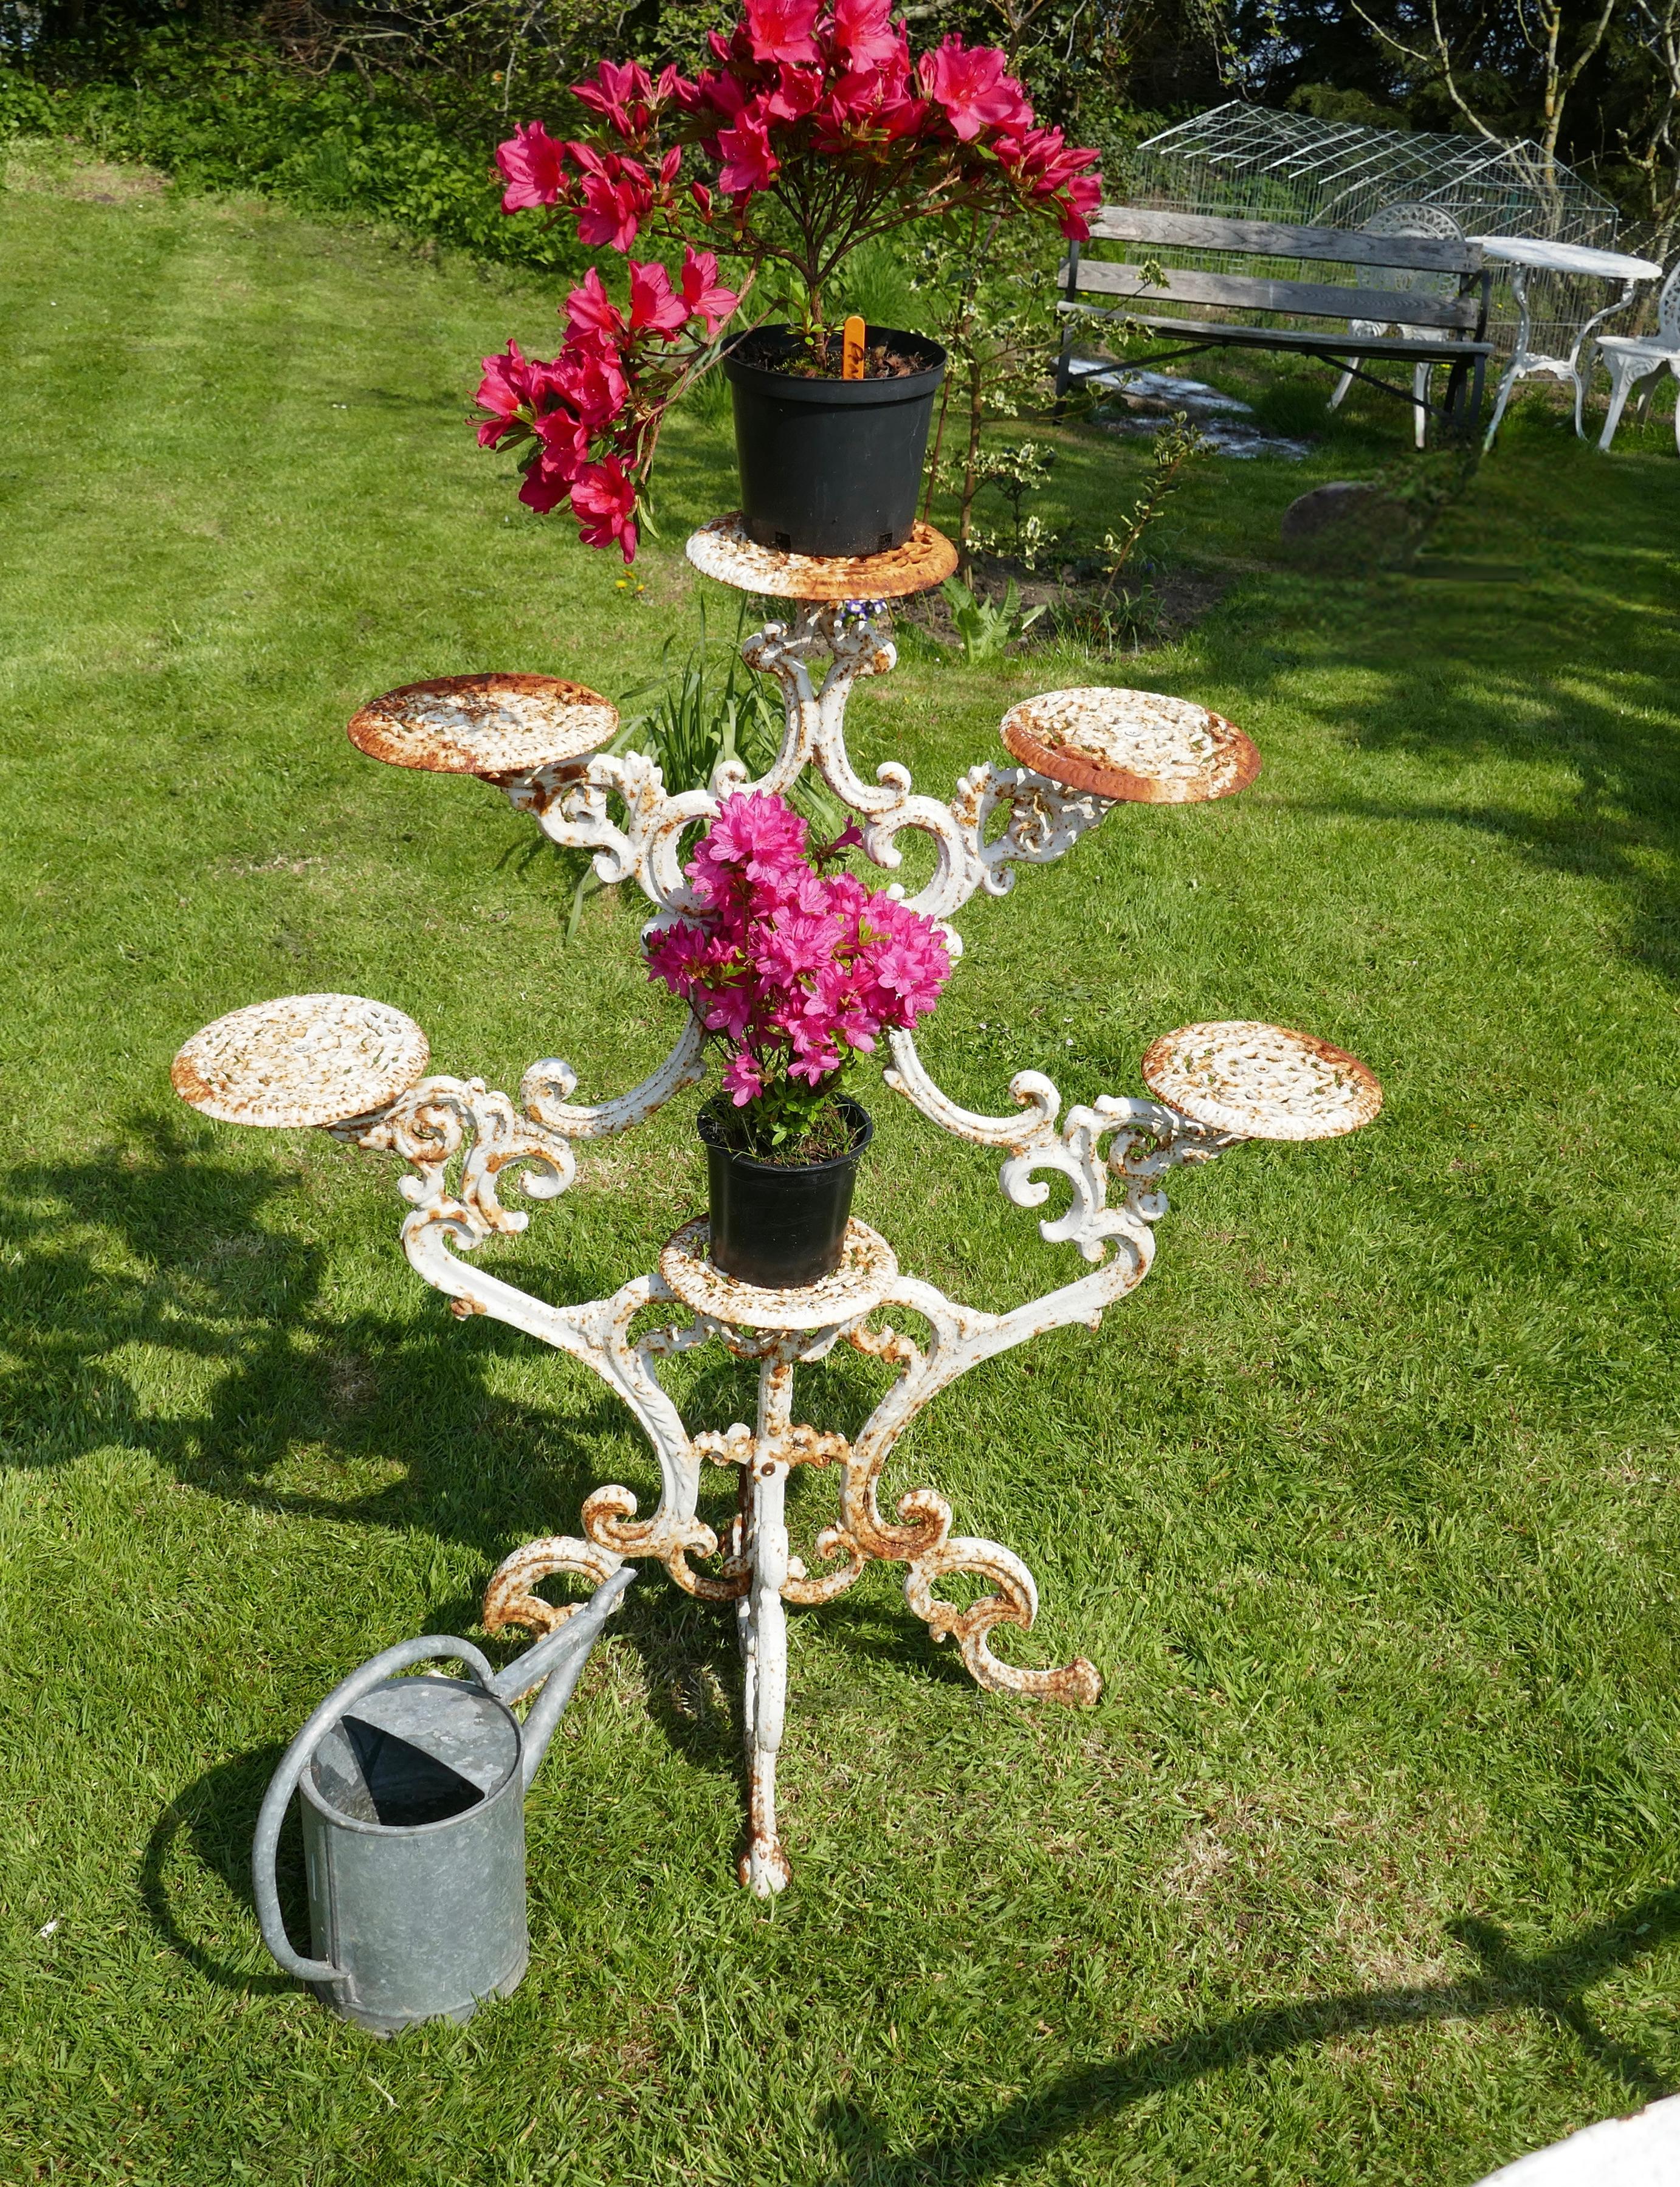 Weathered cast iron 6 branch plant stand.


A truly architectural piece for the garden, the stand is made in Iron so is very heavy, it has 6 branches each with a plant platform at the end of each, it stands on 4 legs so very sturdy

The stand